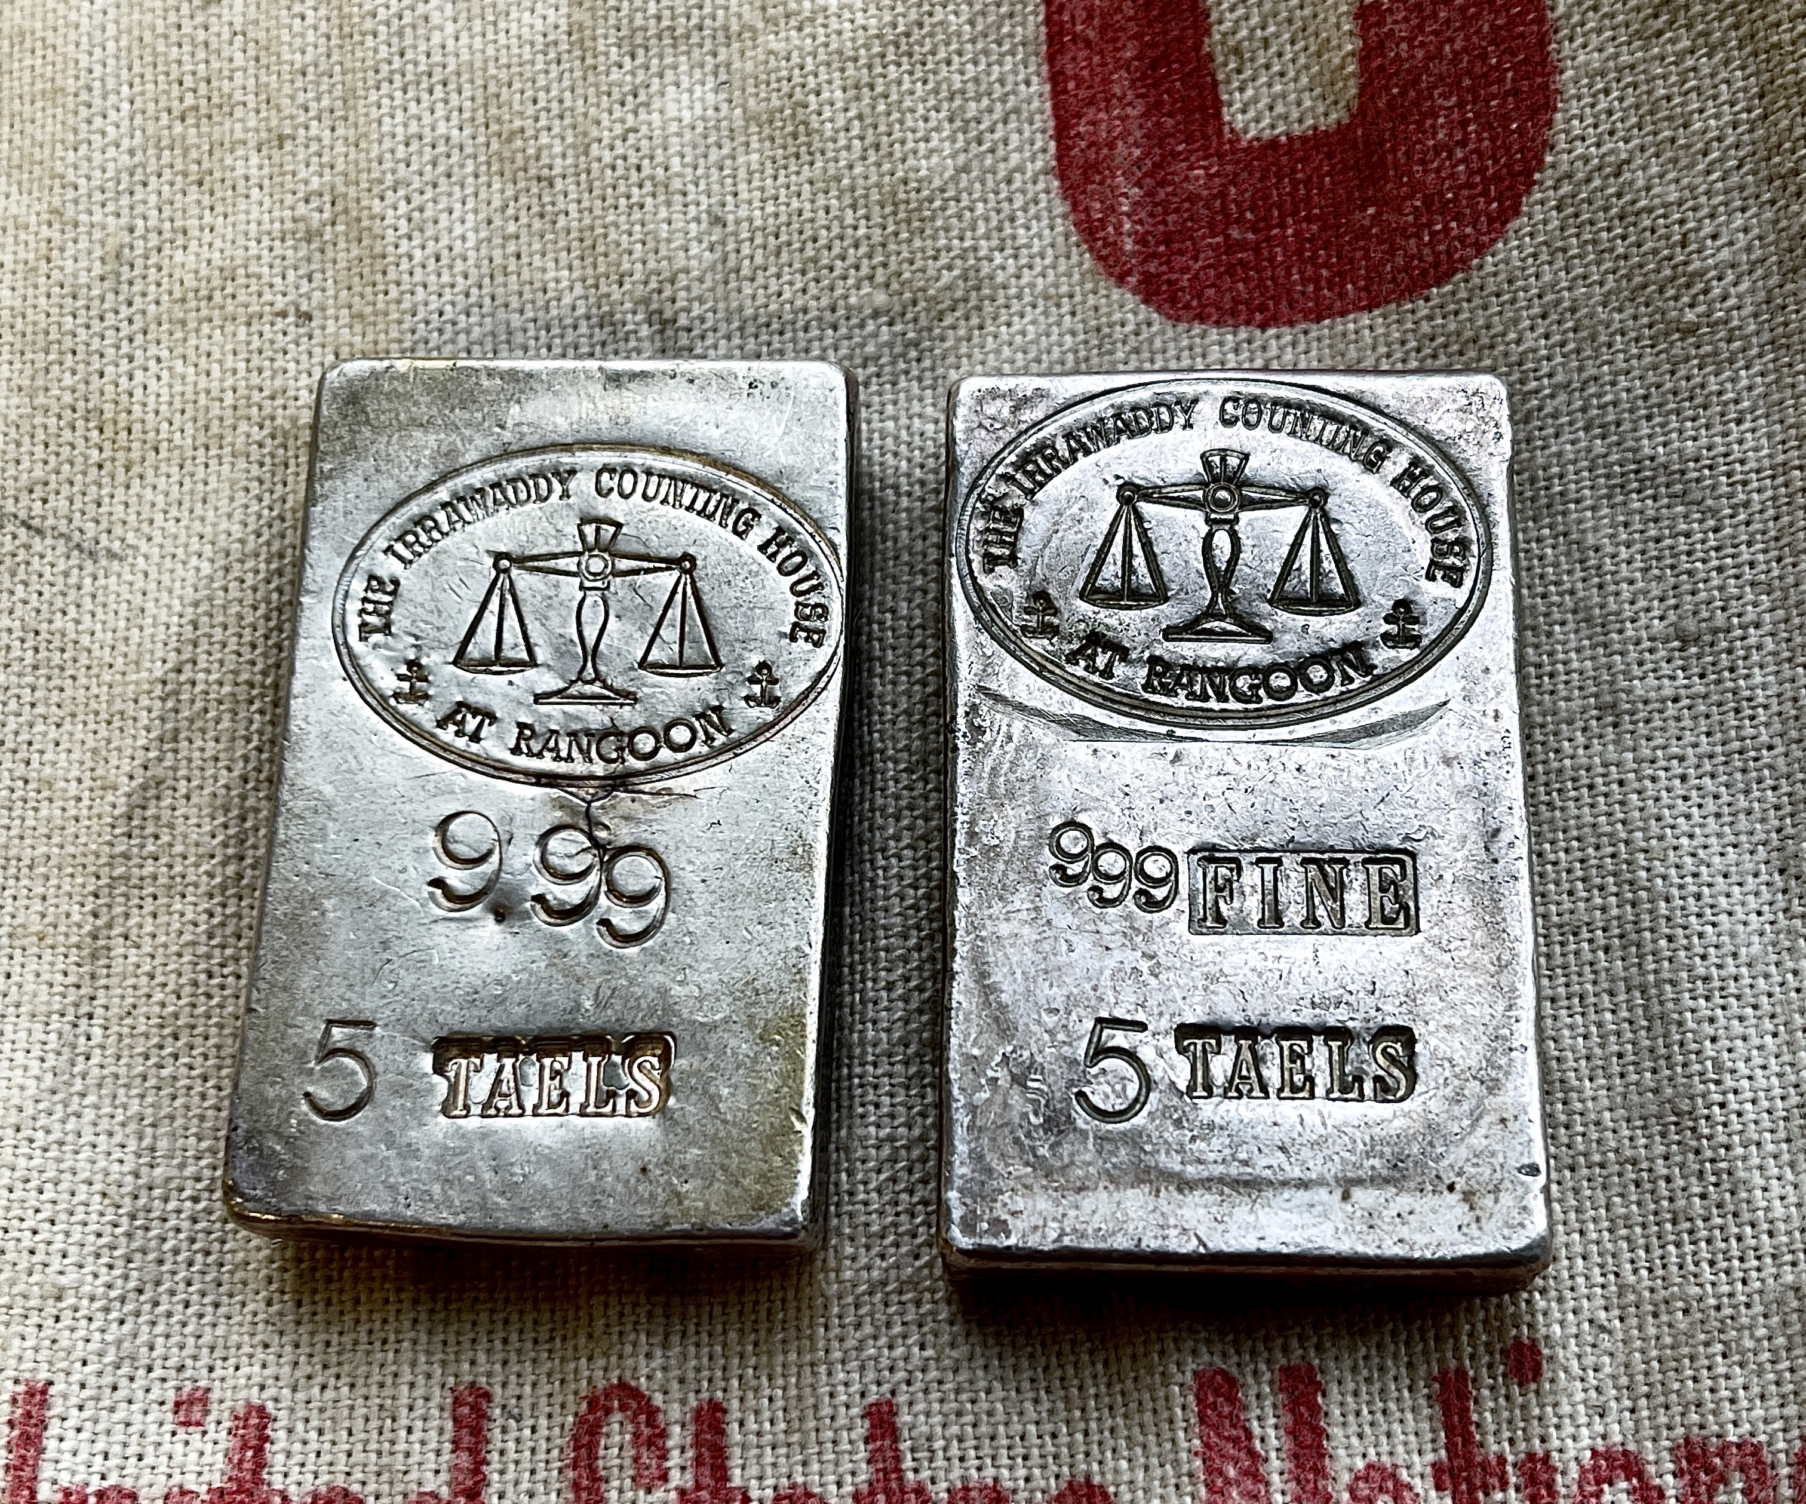 Irrawaddy Counting House Vintage Silver Bars